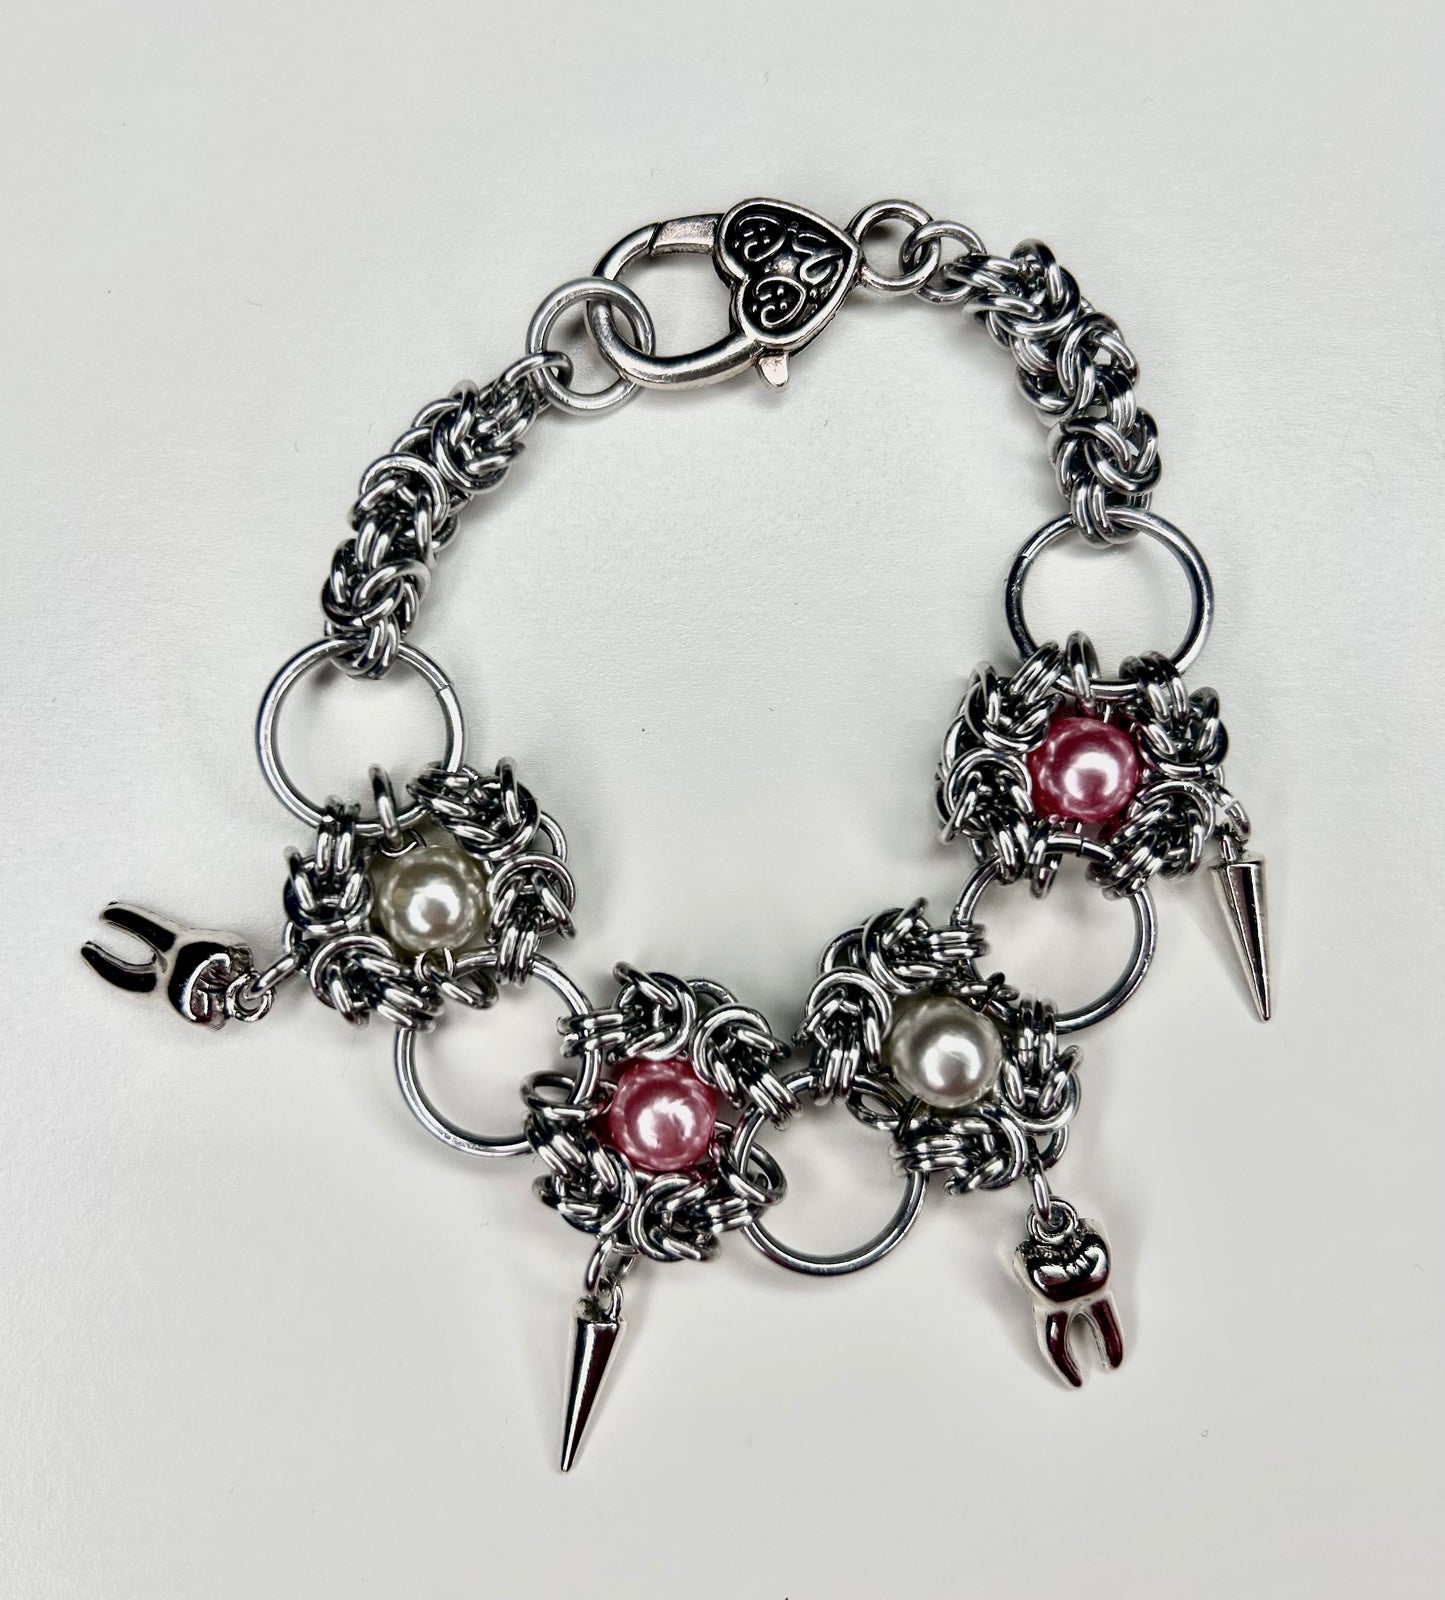 'Adelaide' Chainmail Bracelet